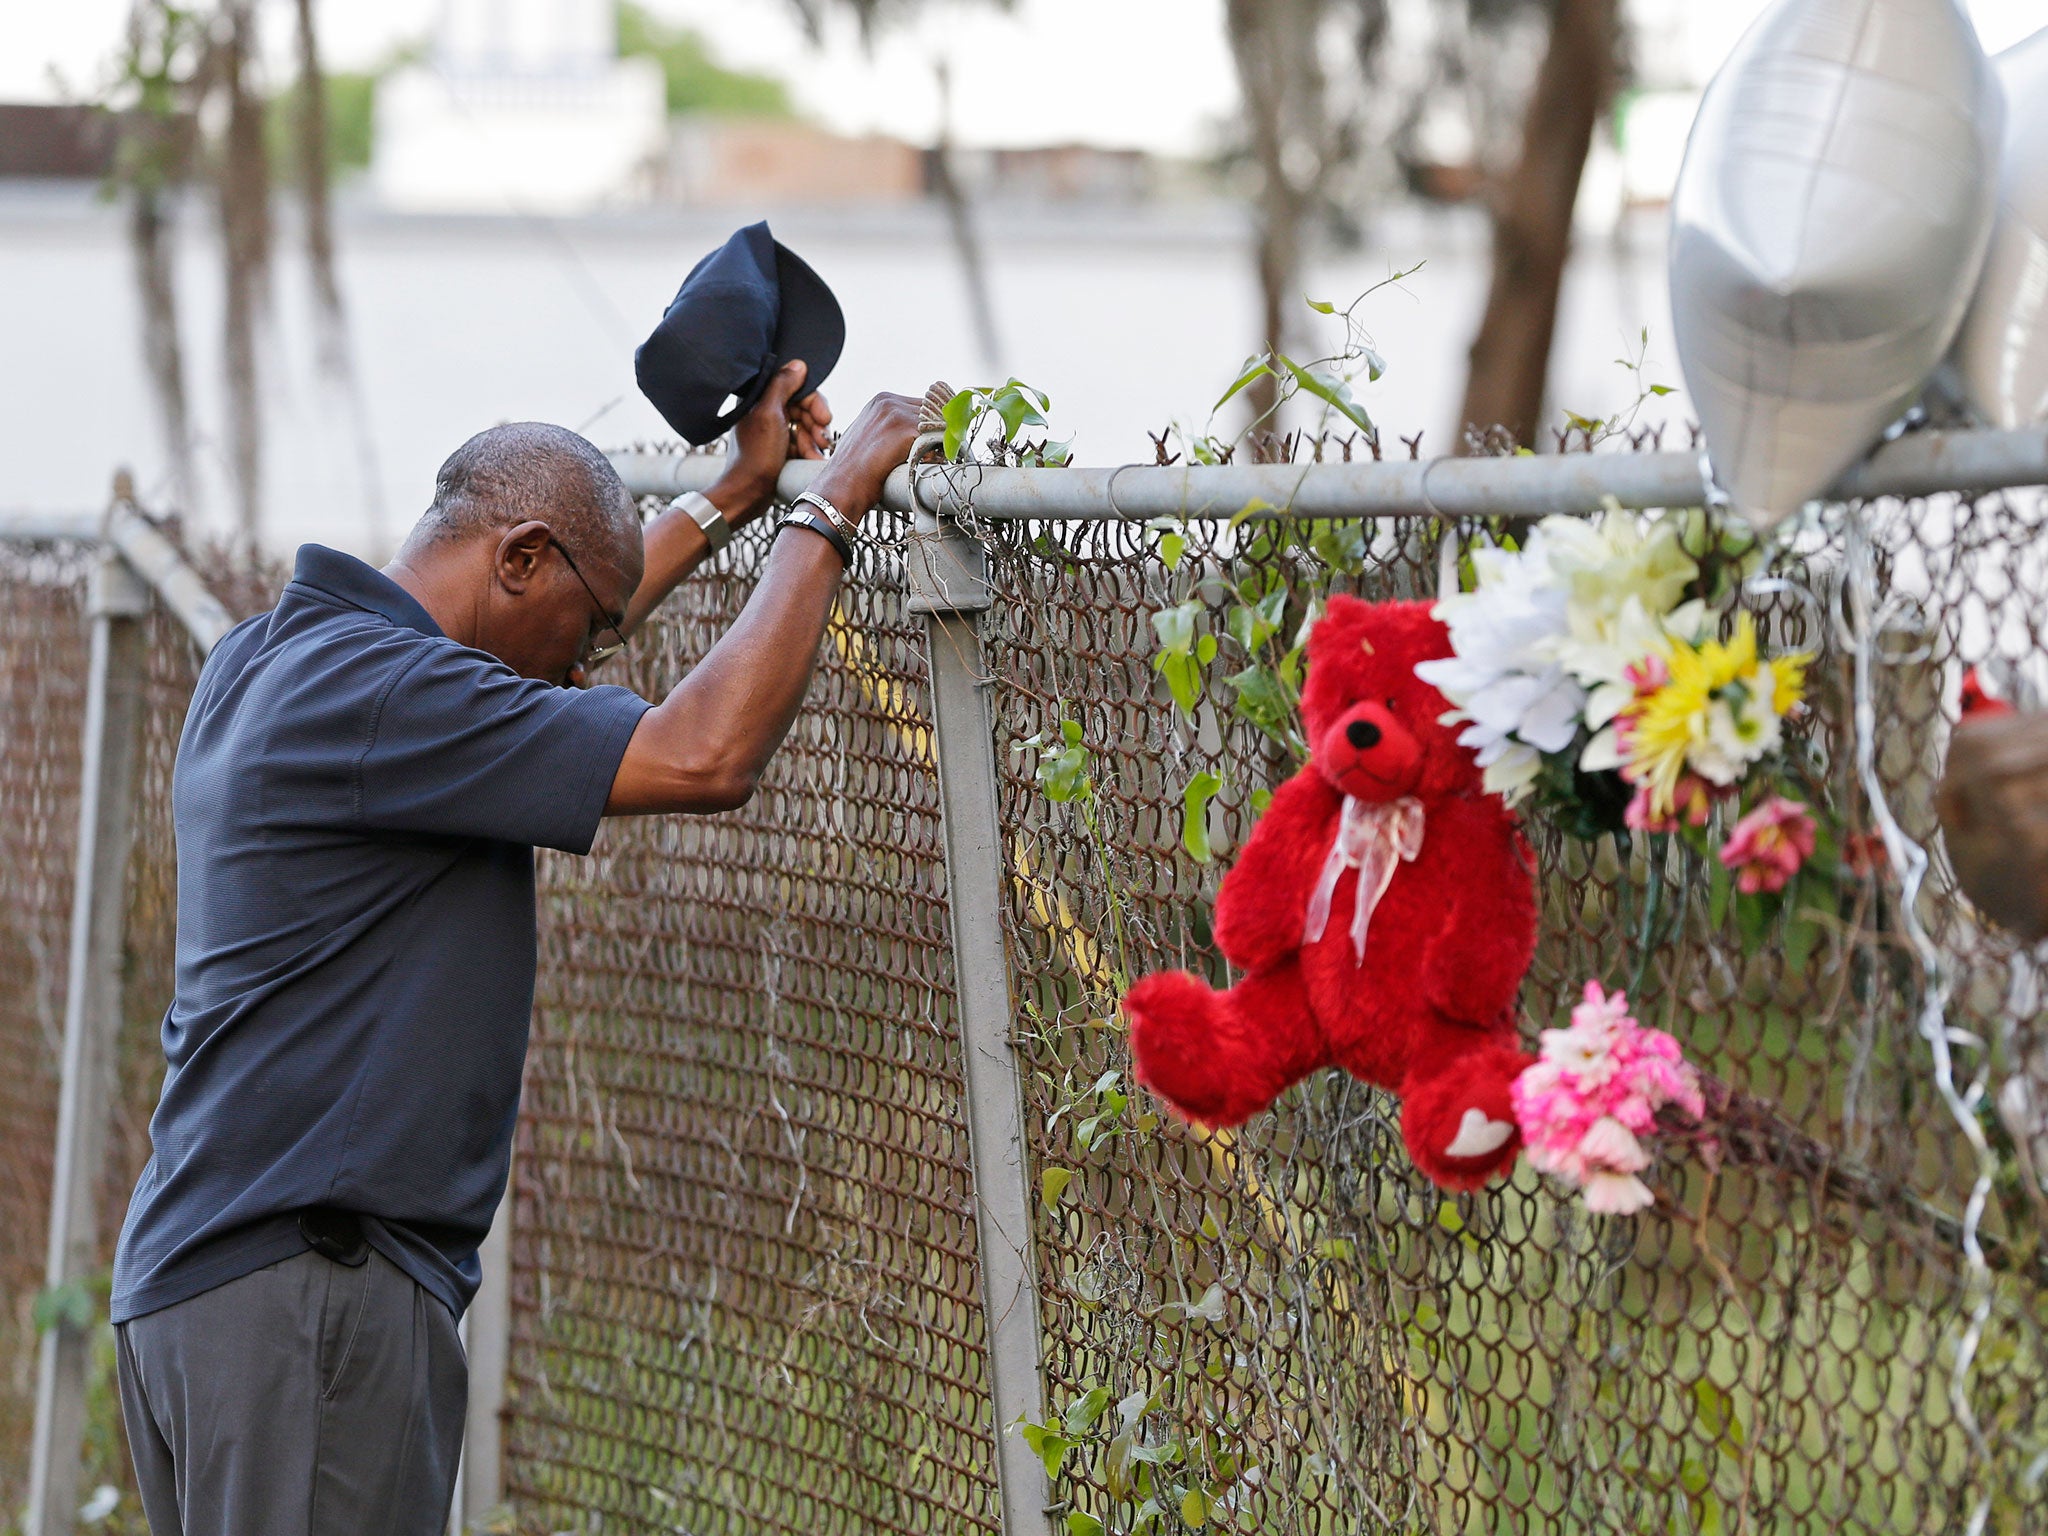 Jerome Flood, of James Island, S.C., pauses for a moment of silence at the scene the killing of Walter Scott by a North Charleston police officer Saturday after a traffic stop in North Charleston. Scott was best man at Flood's wedding and Flood said he wanted to see where it happened. The officer, Michael Thomas Slager, has been fired and charged with murder